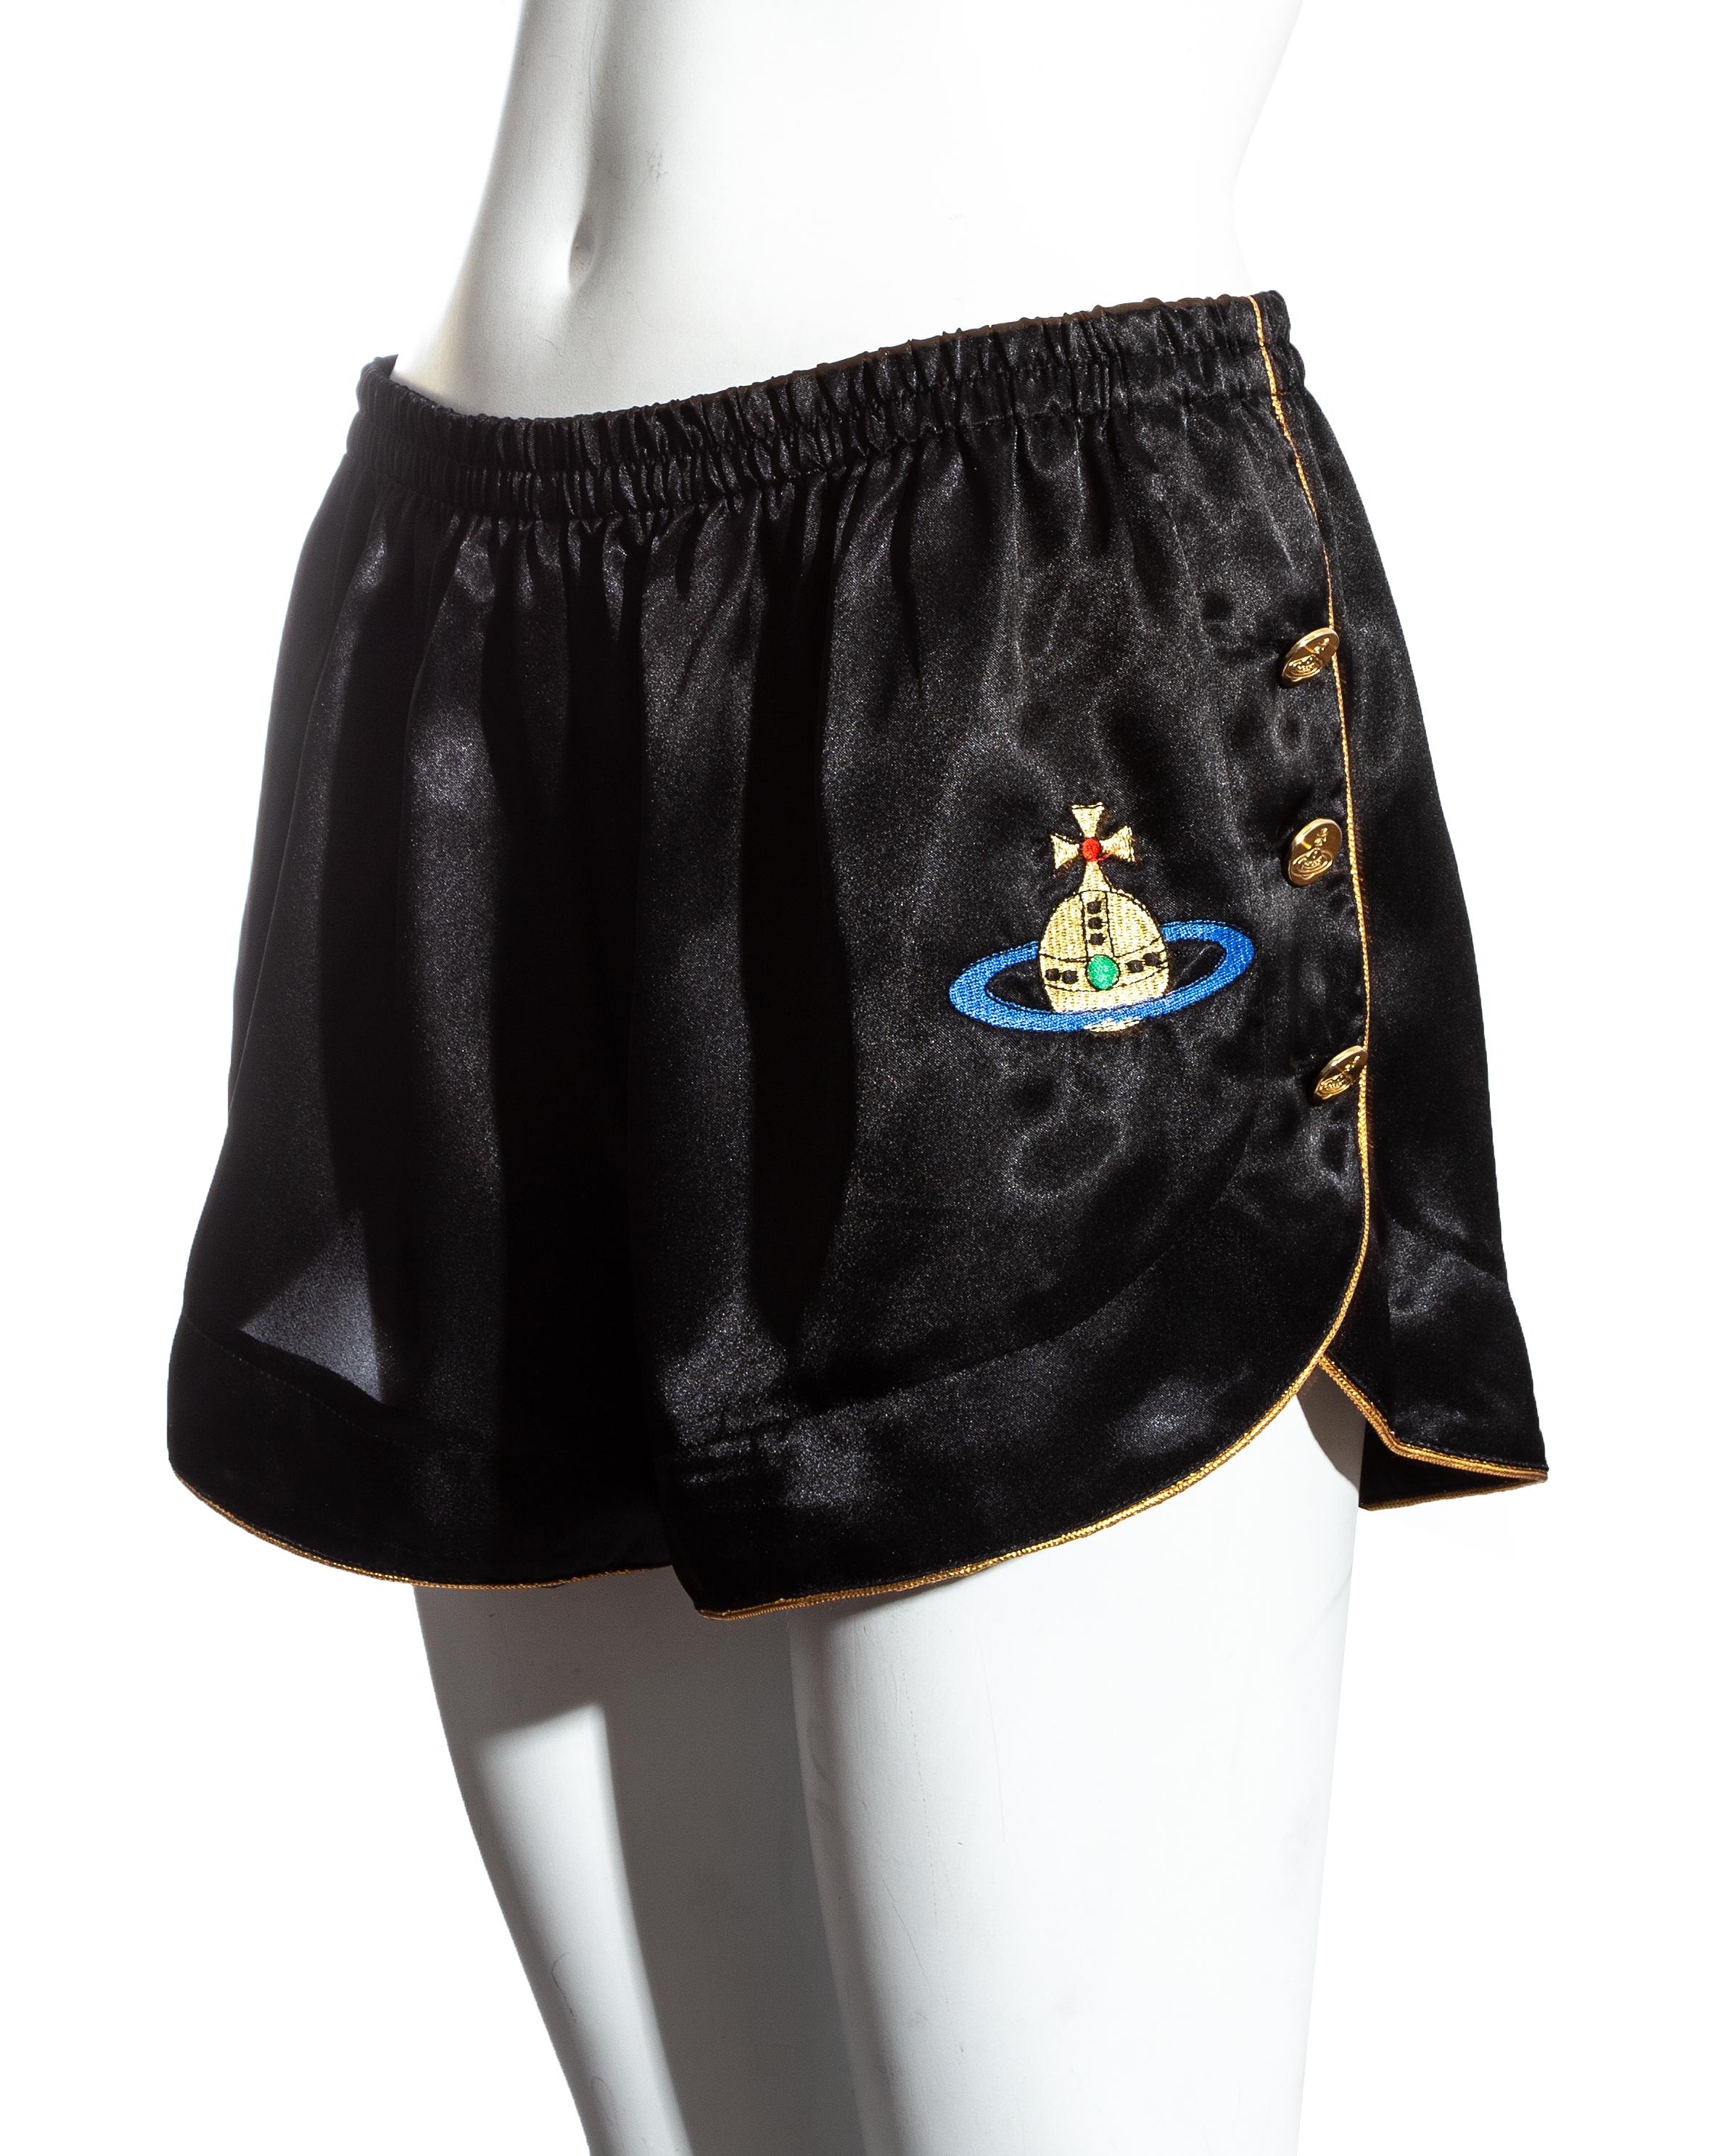 Vivienne Westwood black and gold satin mini shorts with large embroidered orb and 6 westwood gold buttons on side slits.

Spring-Summer 1993